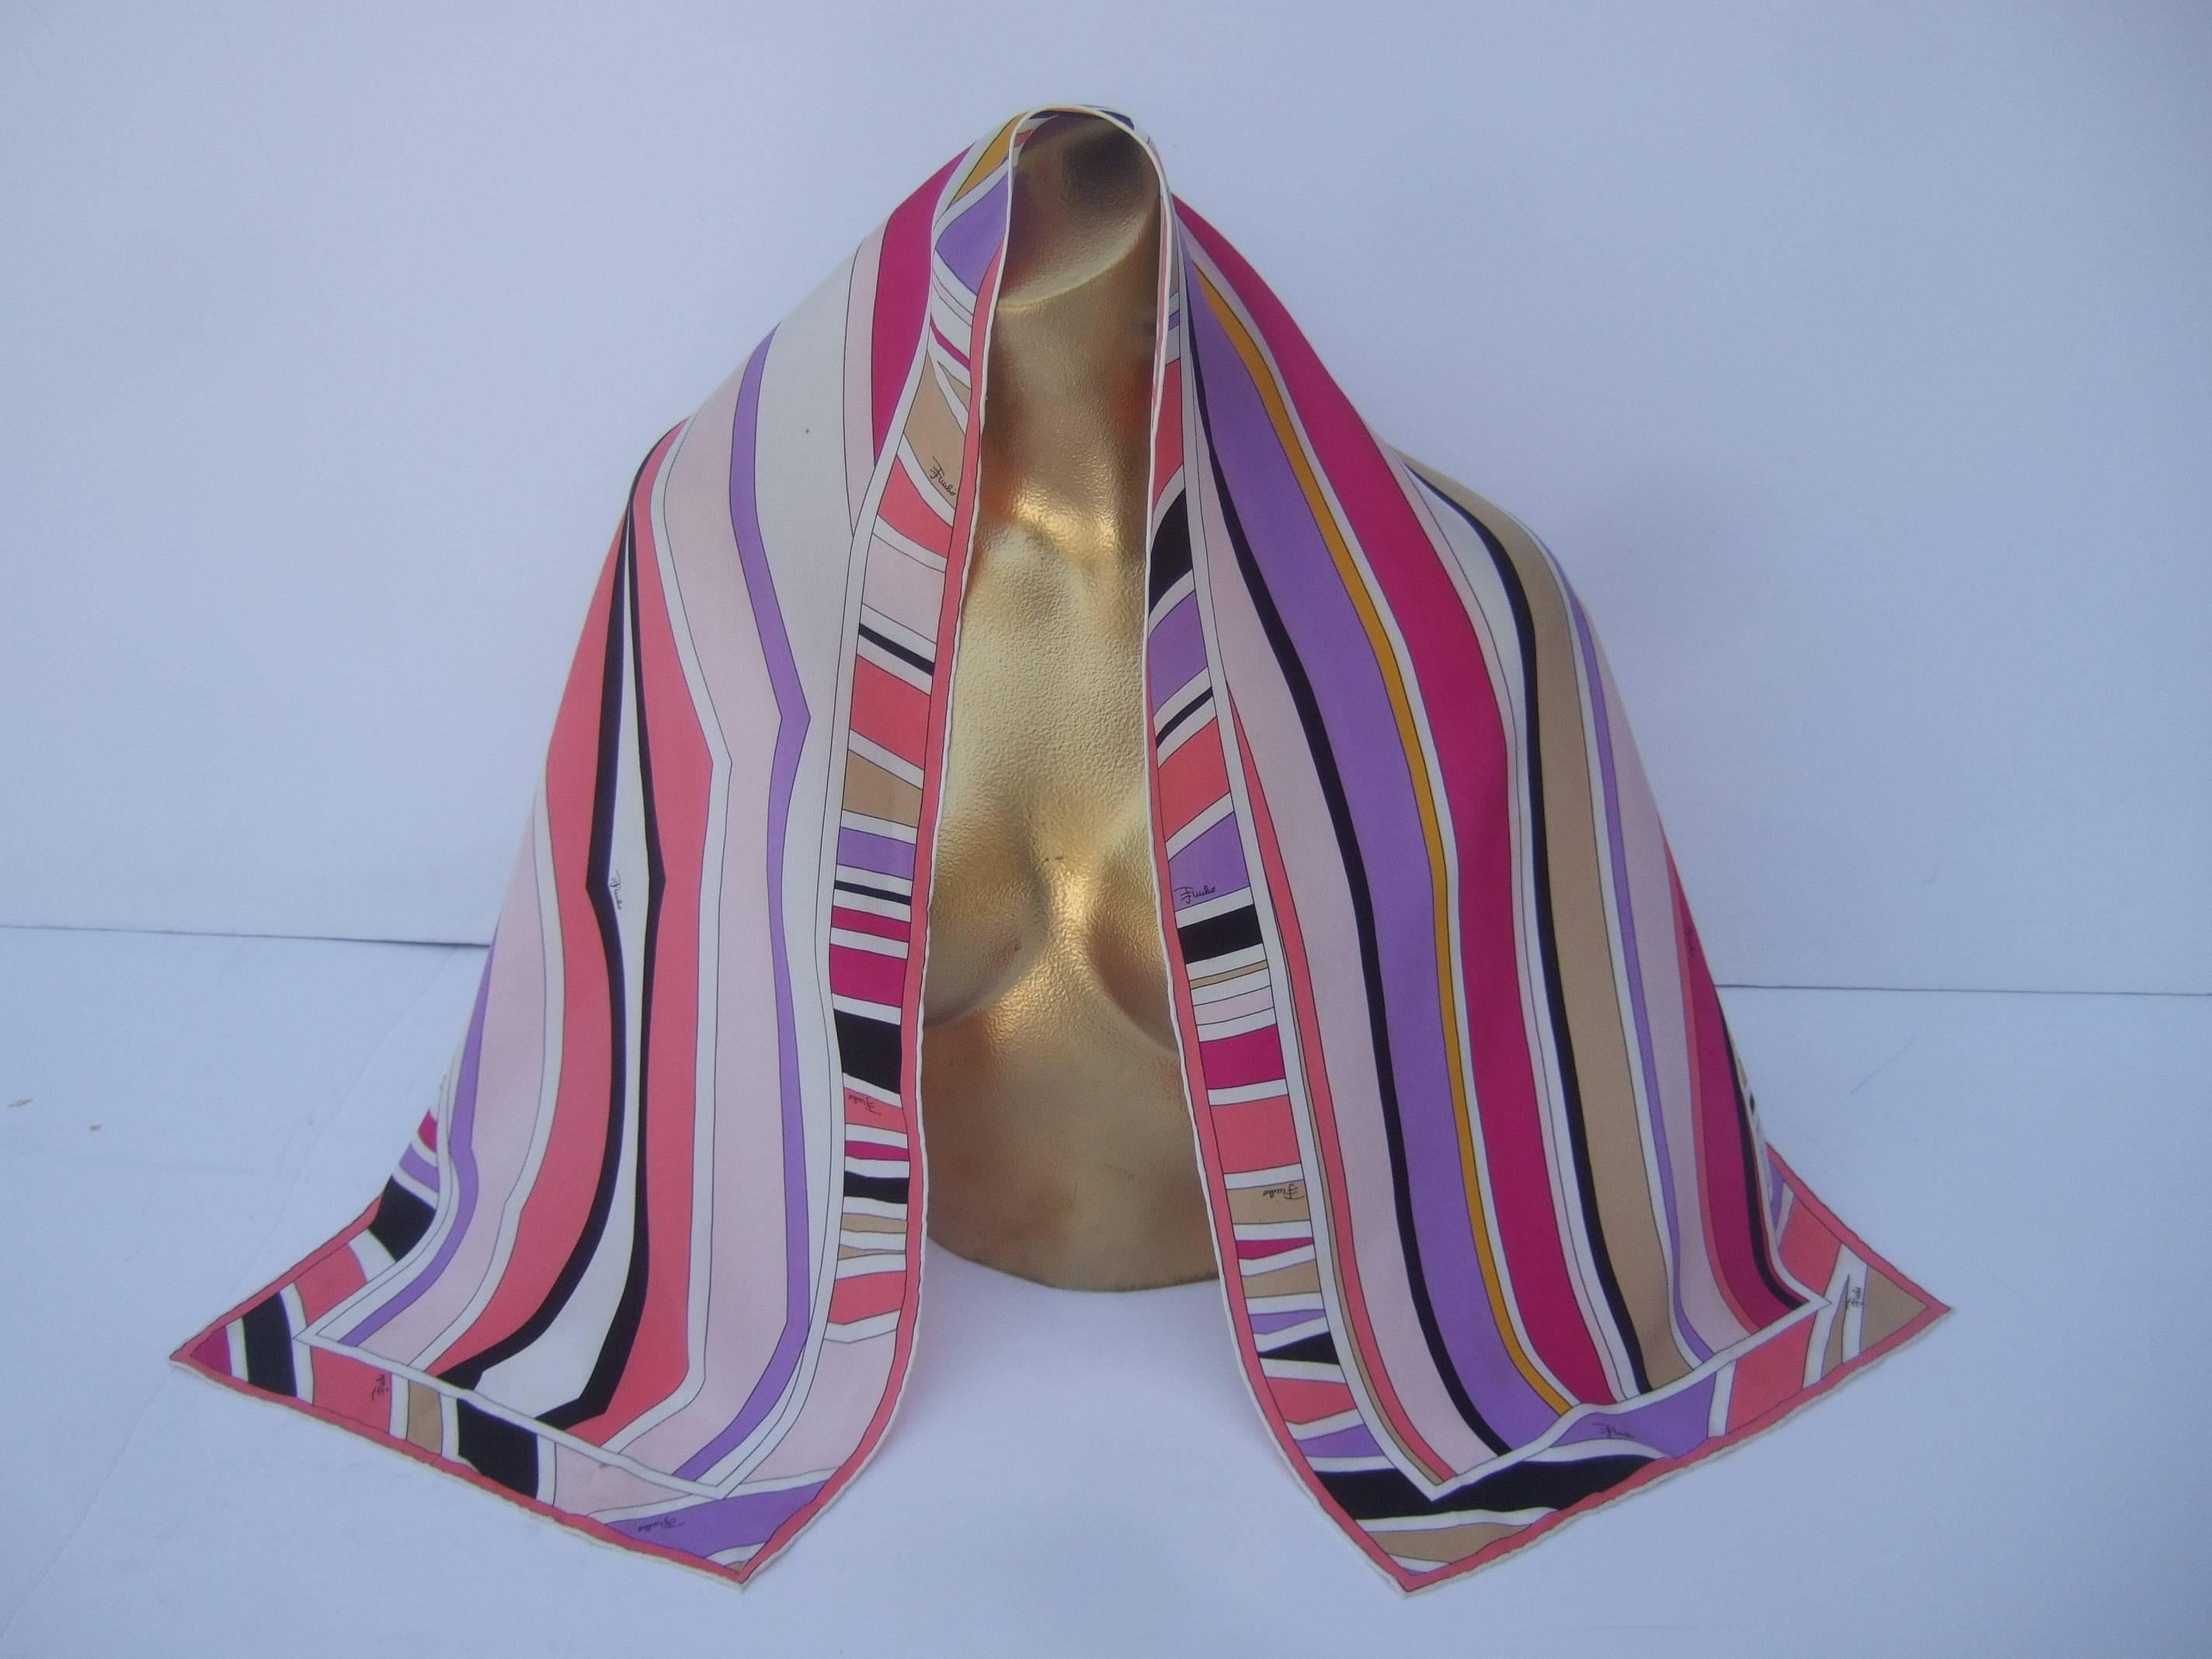 Emilio Pucci Silk oblong graphic print scarf ca 1970s
The Italian silk scarf is designed with a collage
of vibrant linear graphics. Concealed within 
the bold color block print is Emilio's script
name repeated throughout

The pastel colors are